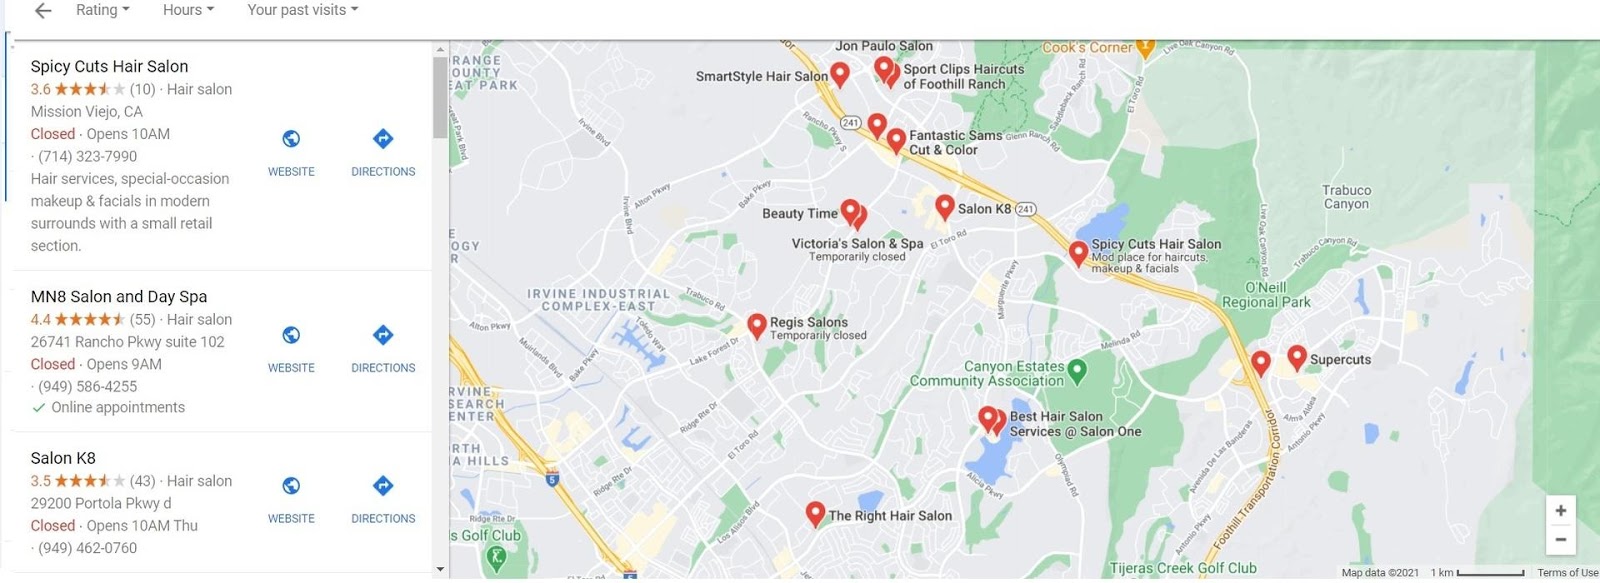 Google My Business Optimization can get your business into the "local 3-pack"